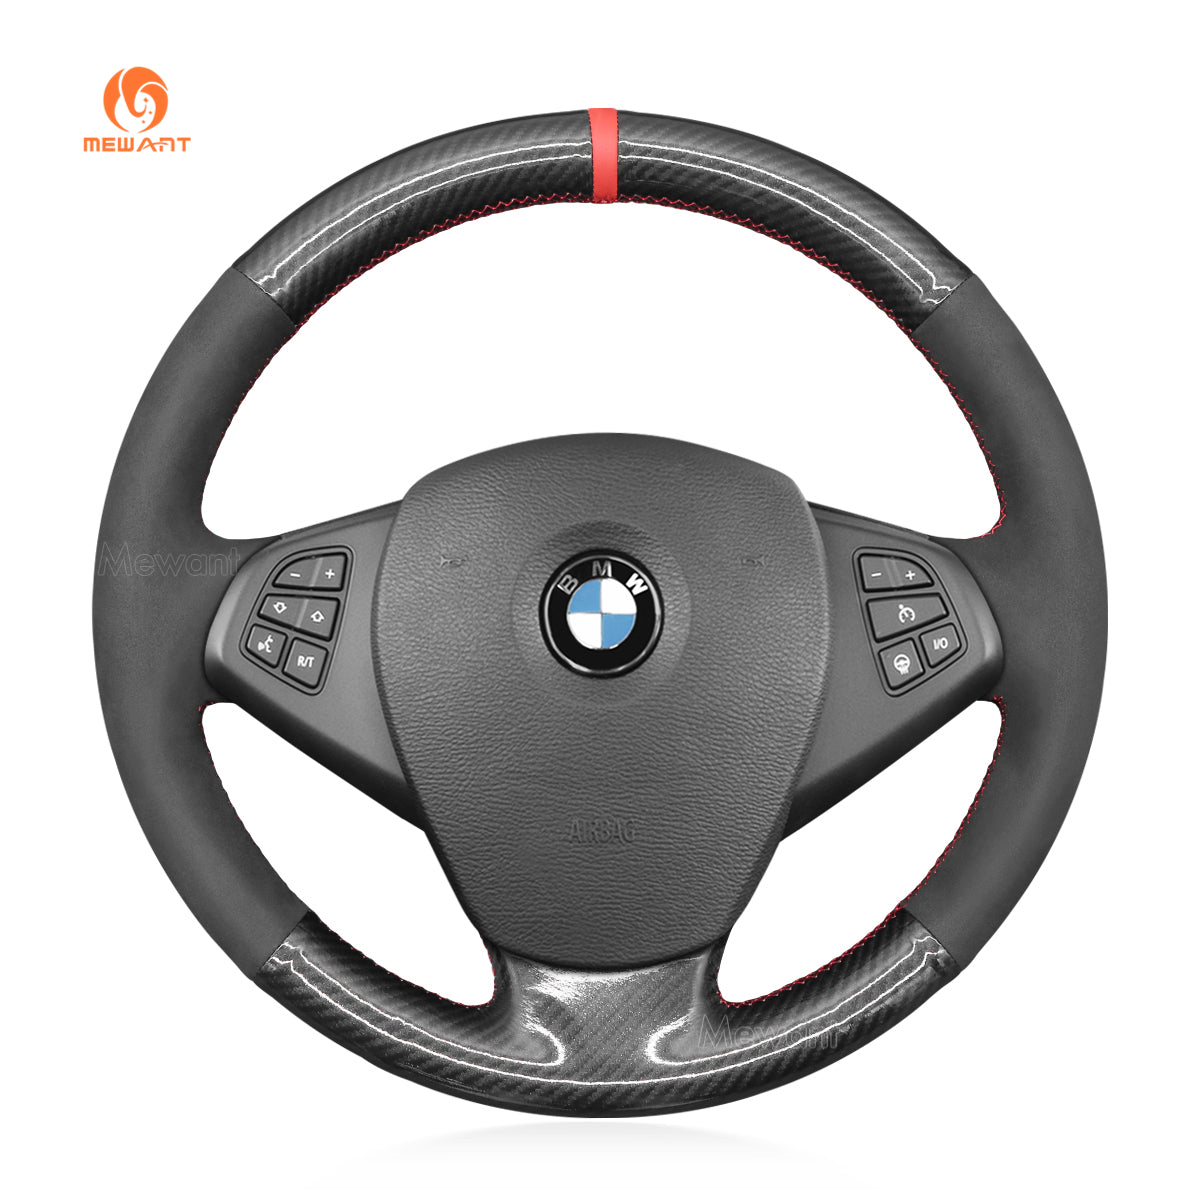 MEWANT Hand Stitch Black Suede Carbon Fiber Car Steering Wheel Cover for BMW X3 E83 2005-2010